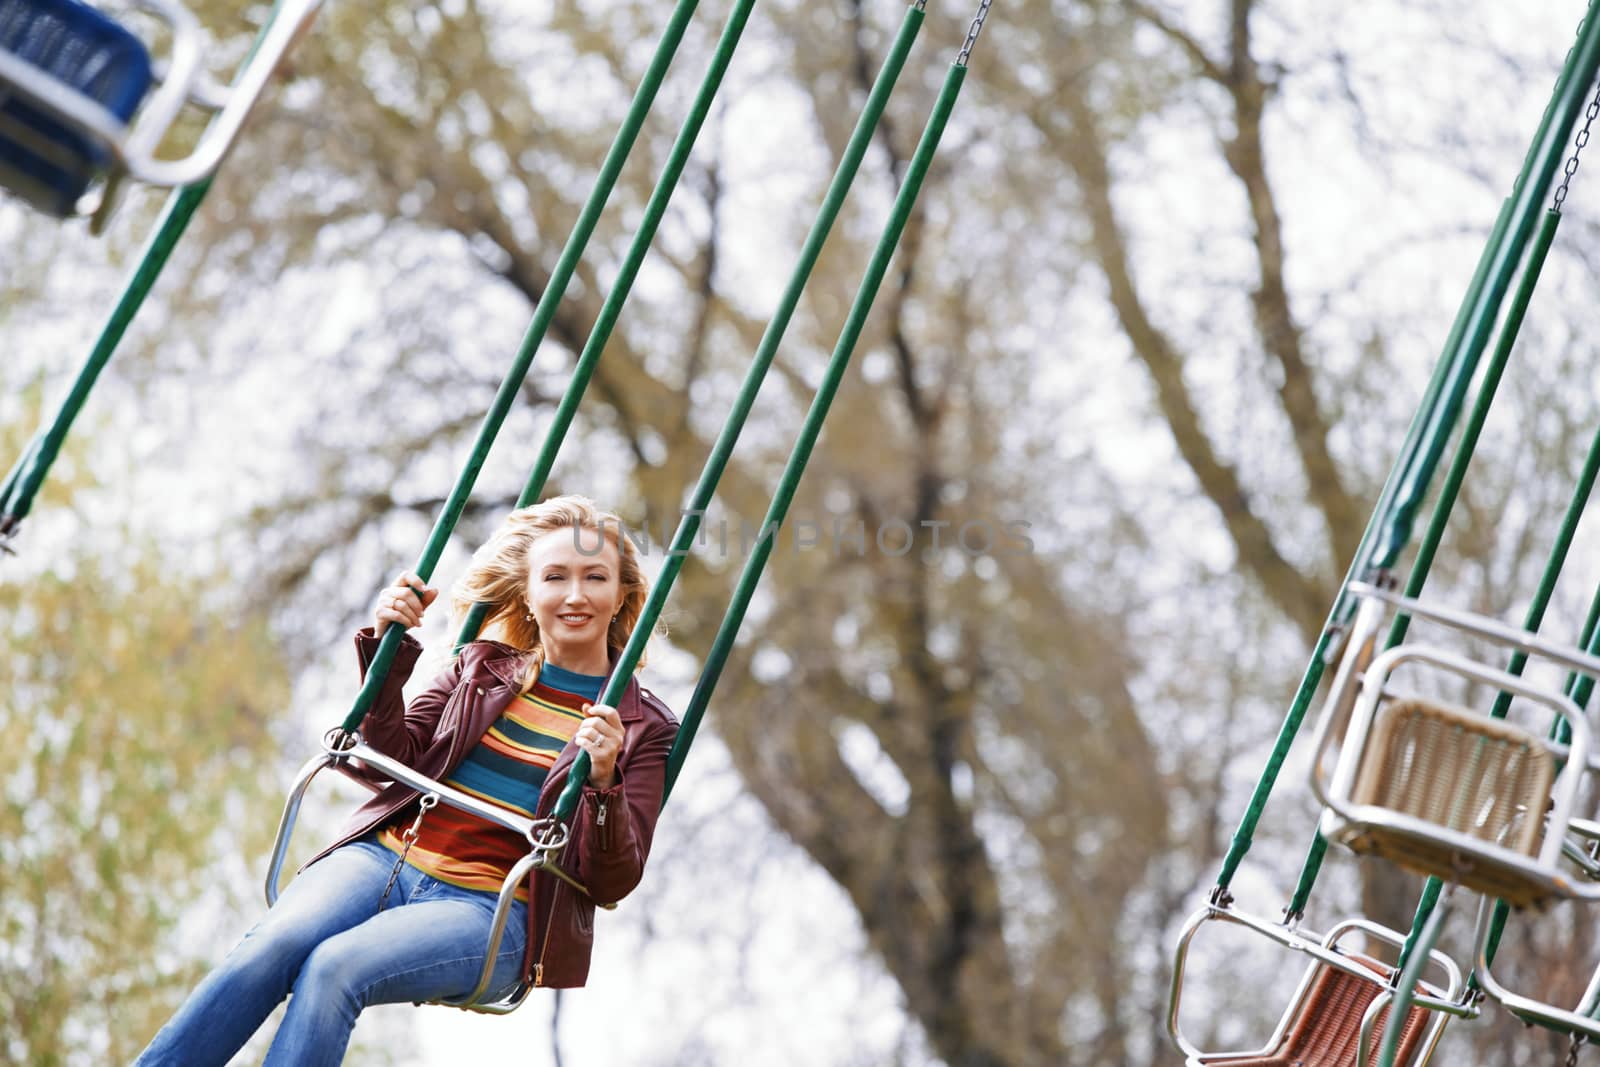 Blond woman riding on a chain swing